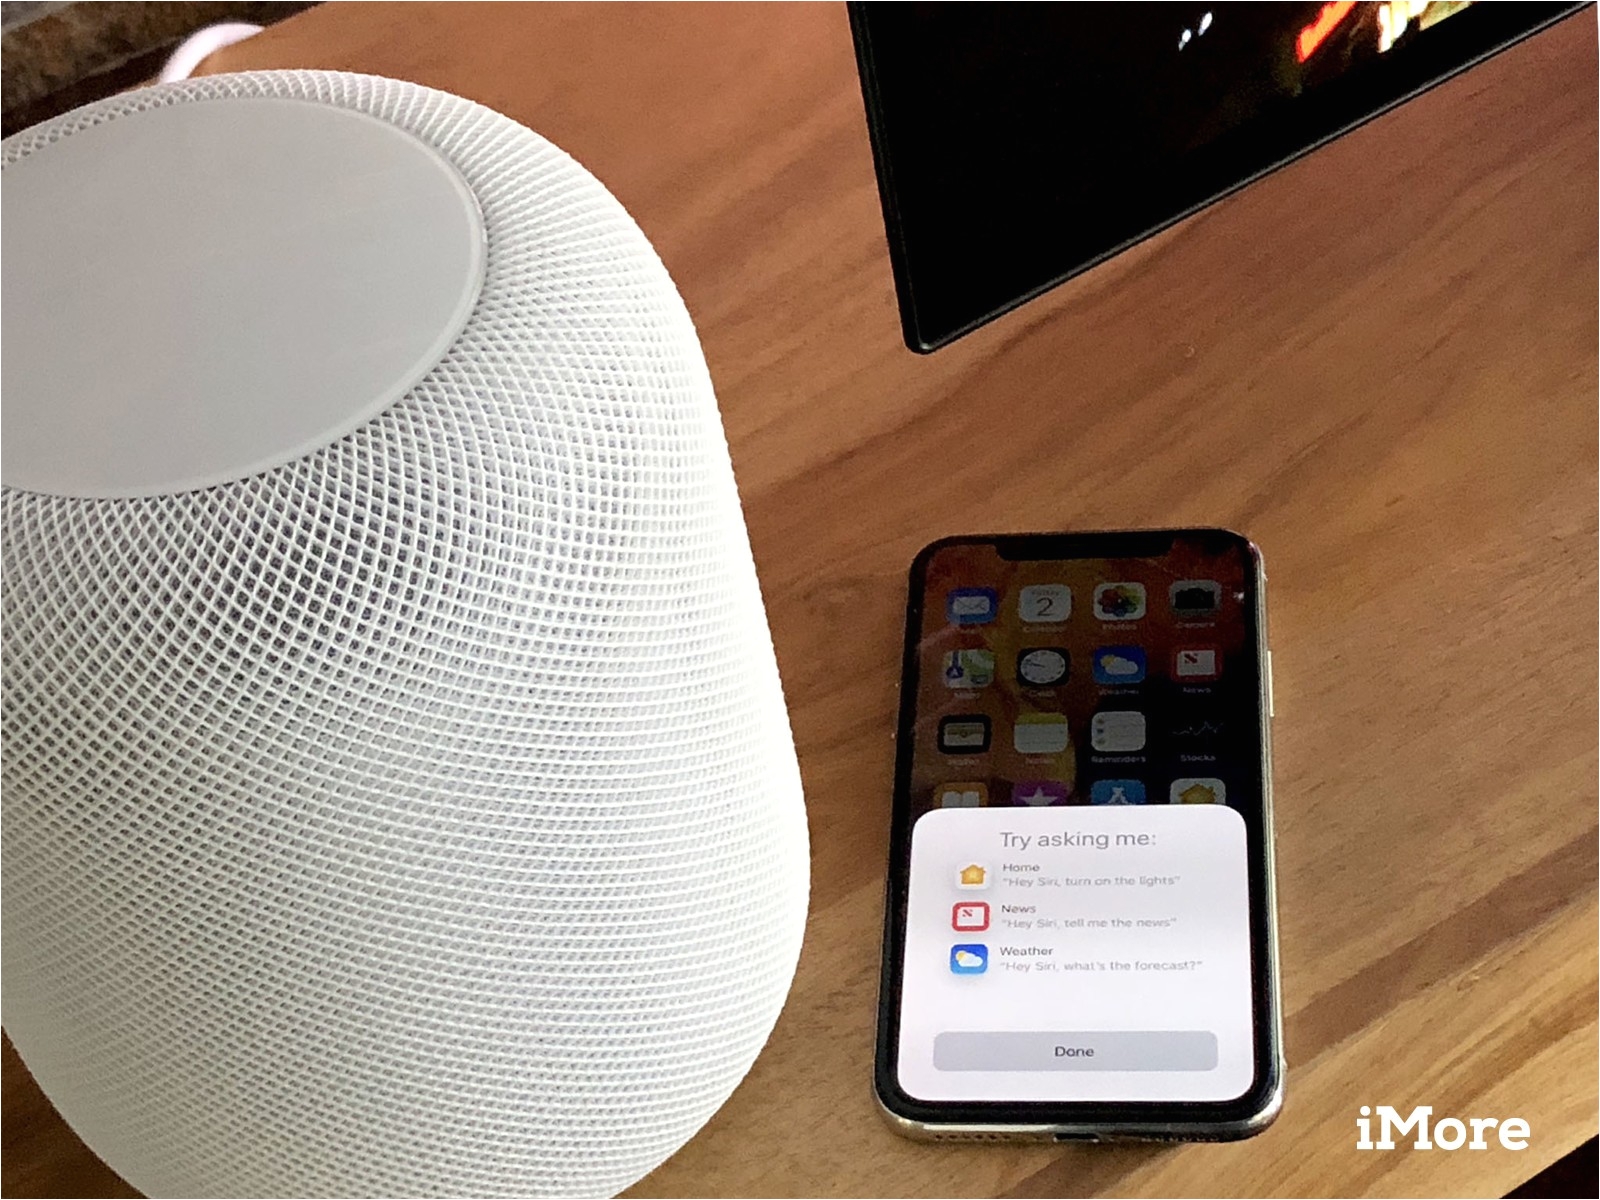 apples homepod is nearly upon us and many will be wondering how to set up their new smart speaker the process is actually fairly simple but there are